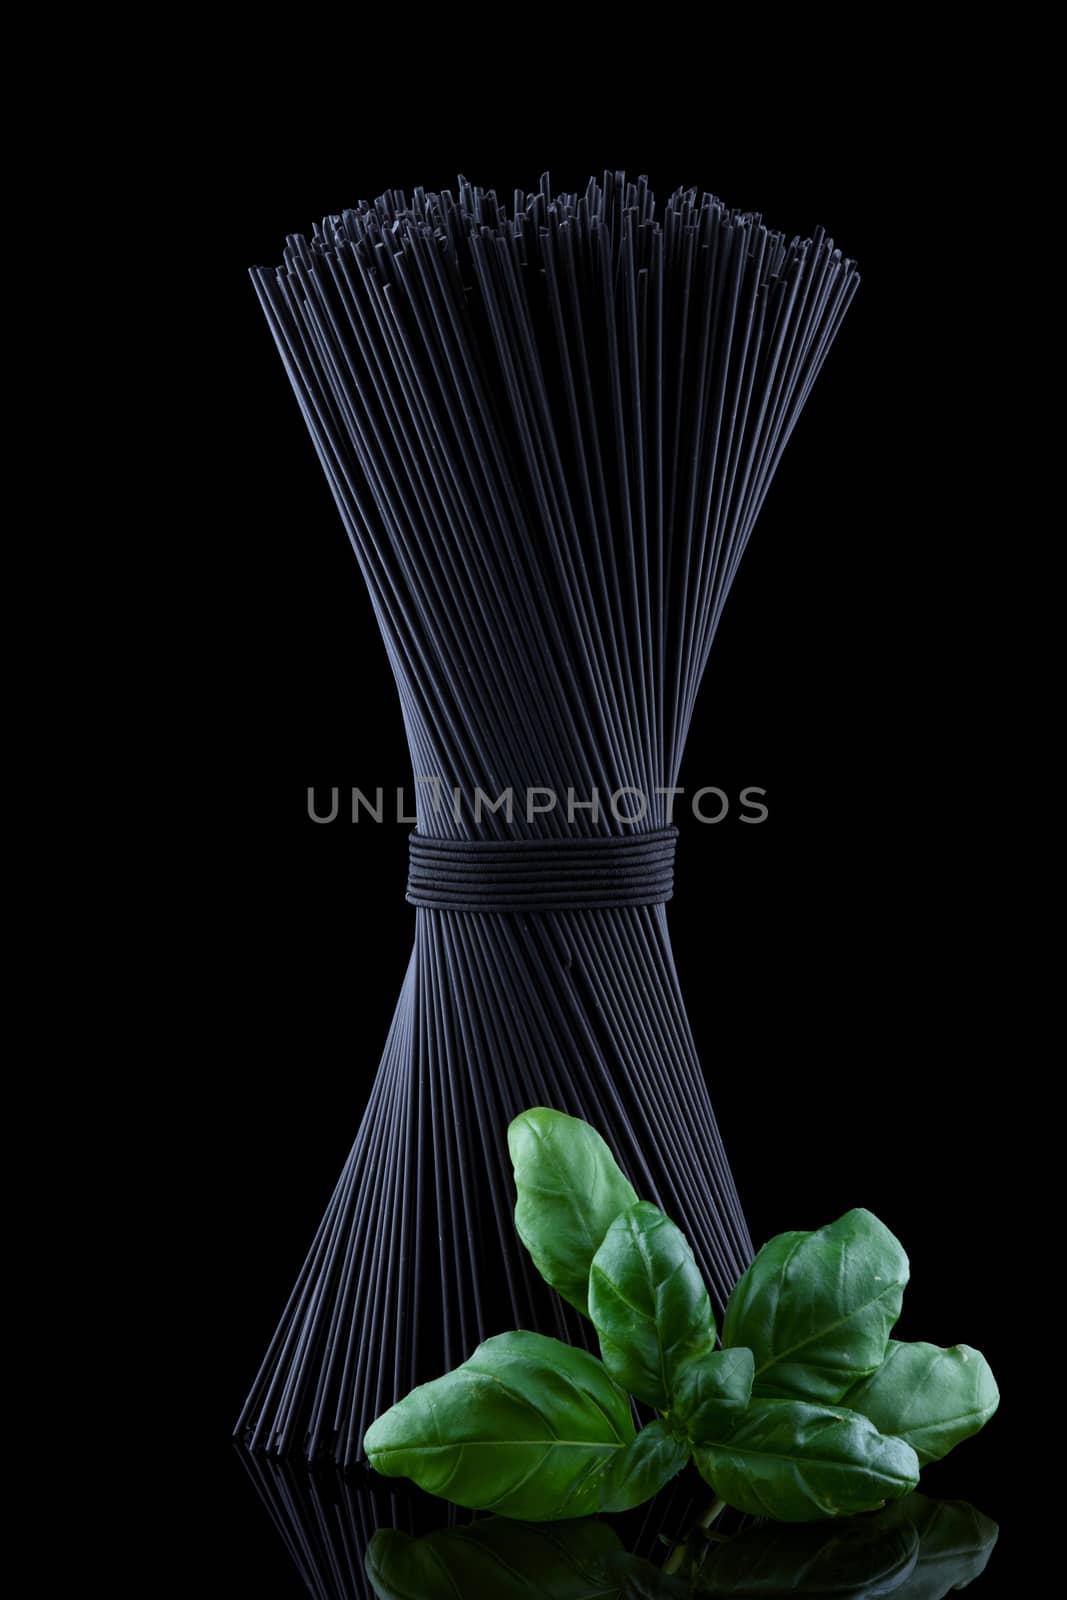 Black spaghetti with basel leaves on black background.